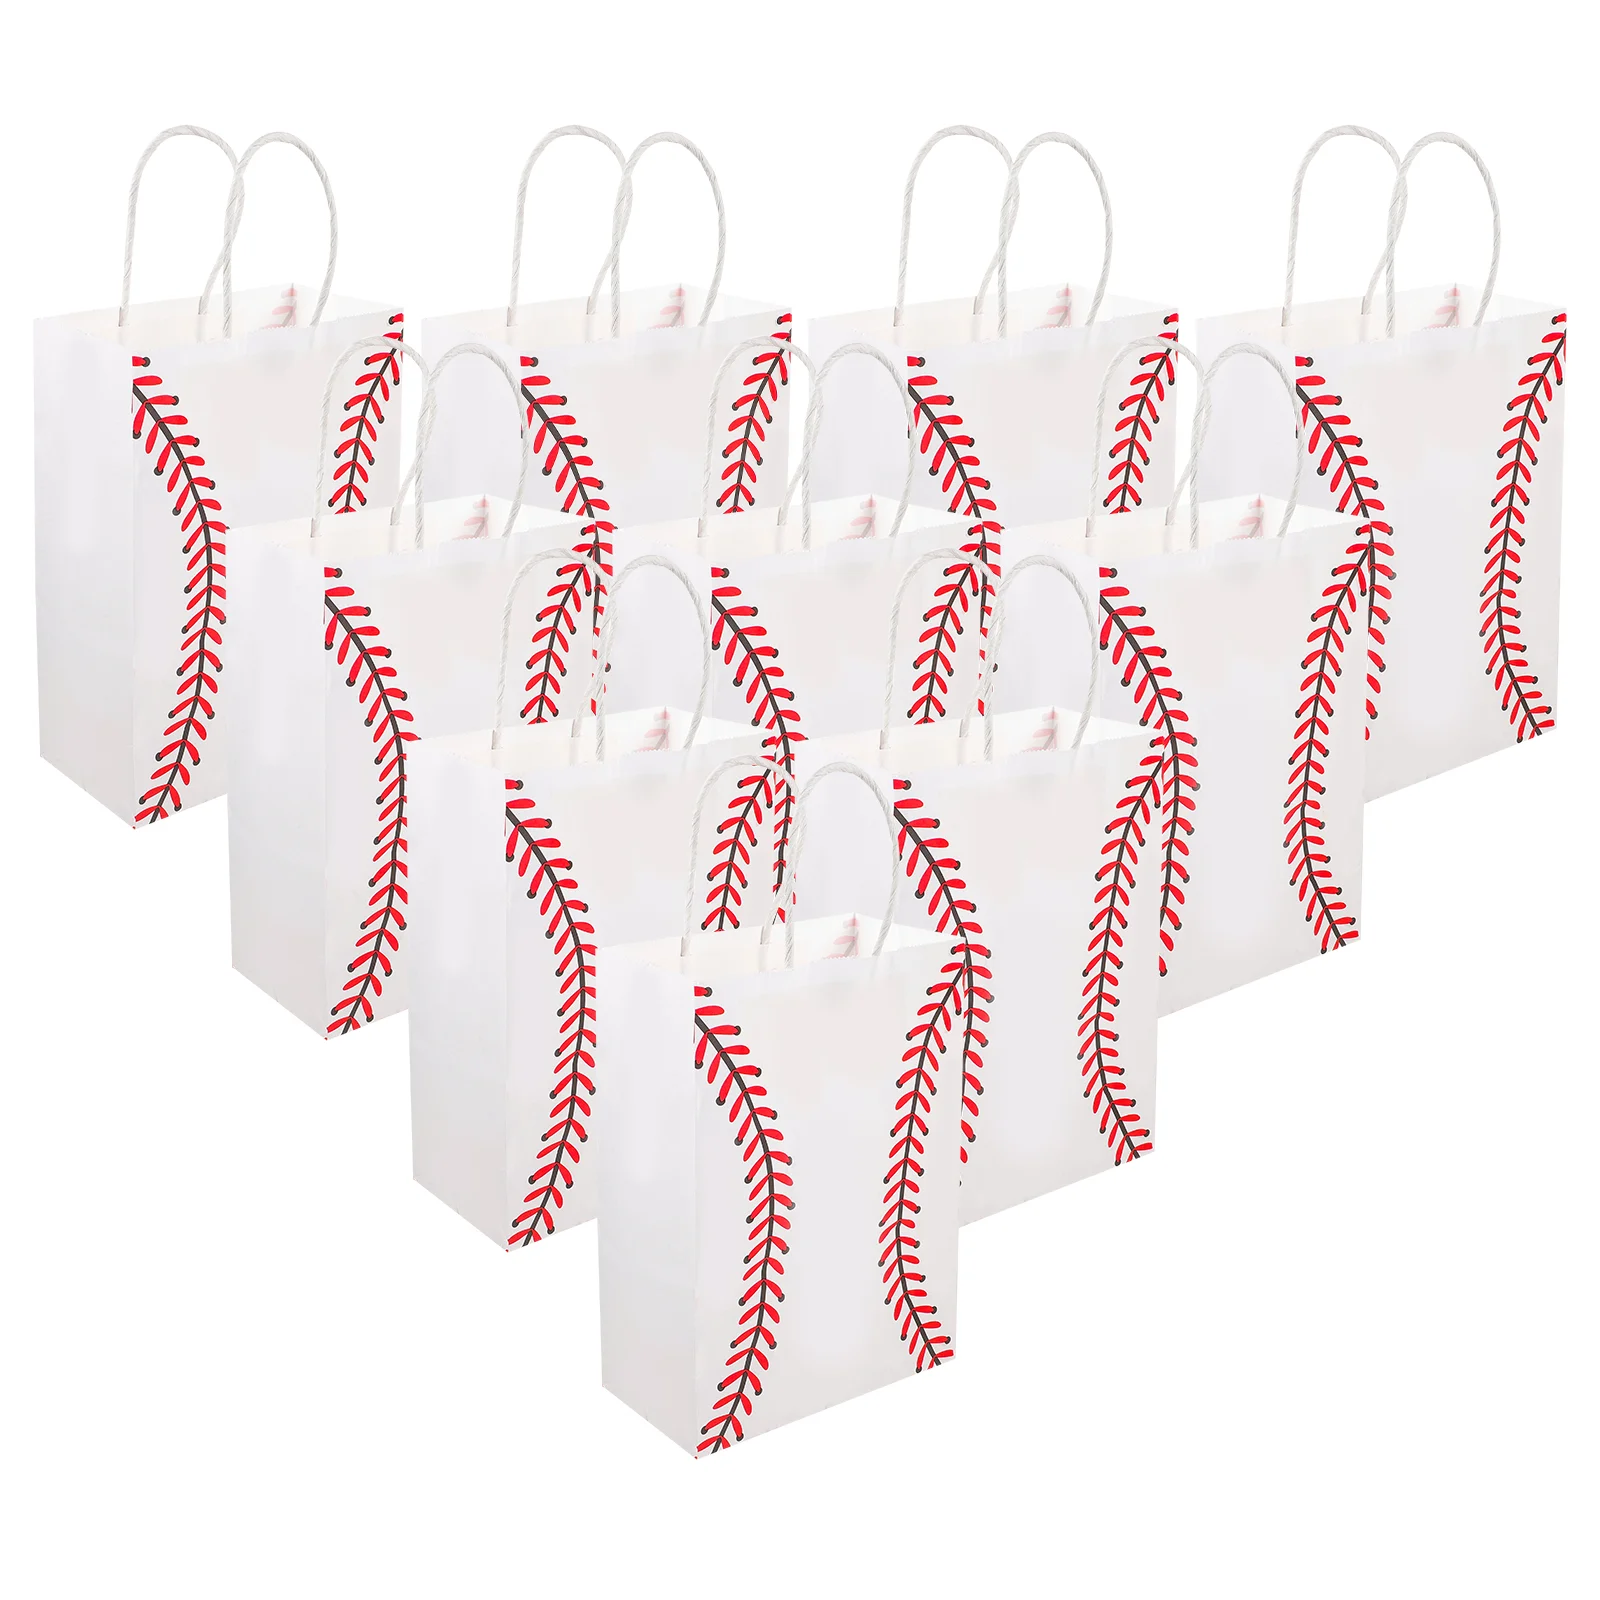 

12 Pcs Baseball Bag Small Gift Bags Favor Size with Handles Paper Goodie for Team Kraft